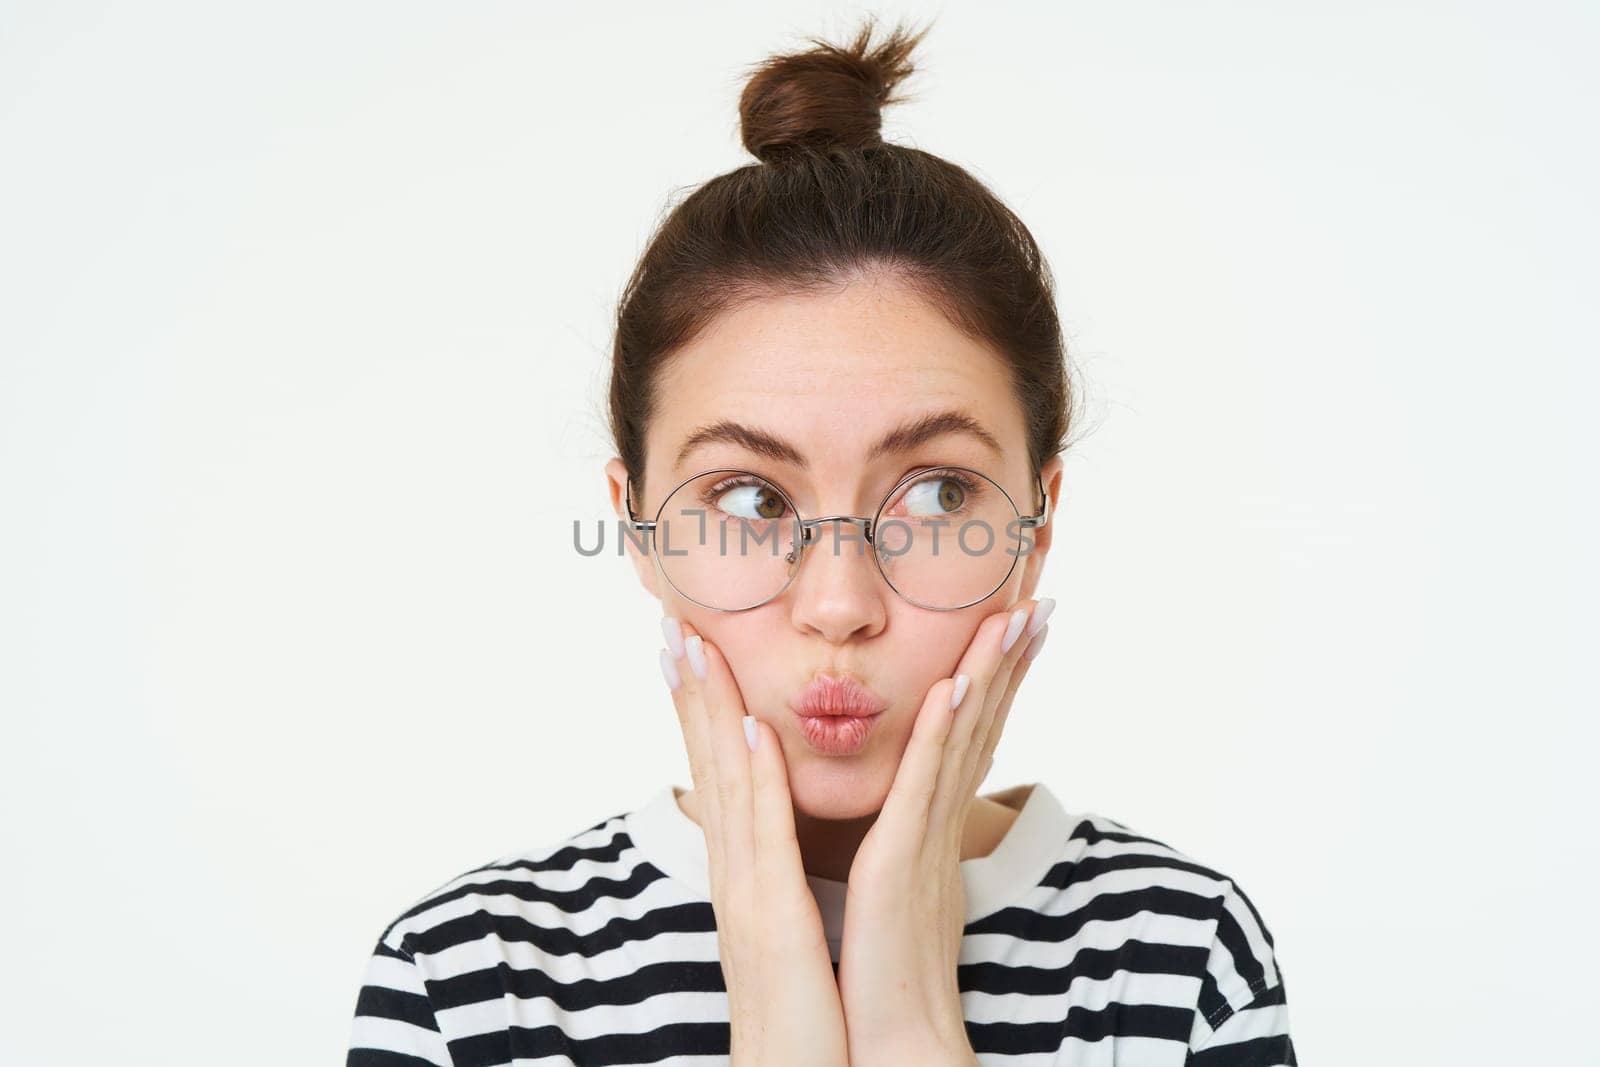 Close up portrait of cute girl in glasses, holds hands on face and puckers lips, looks aside, makes silly face expression, stands over white background.